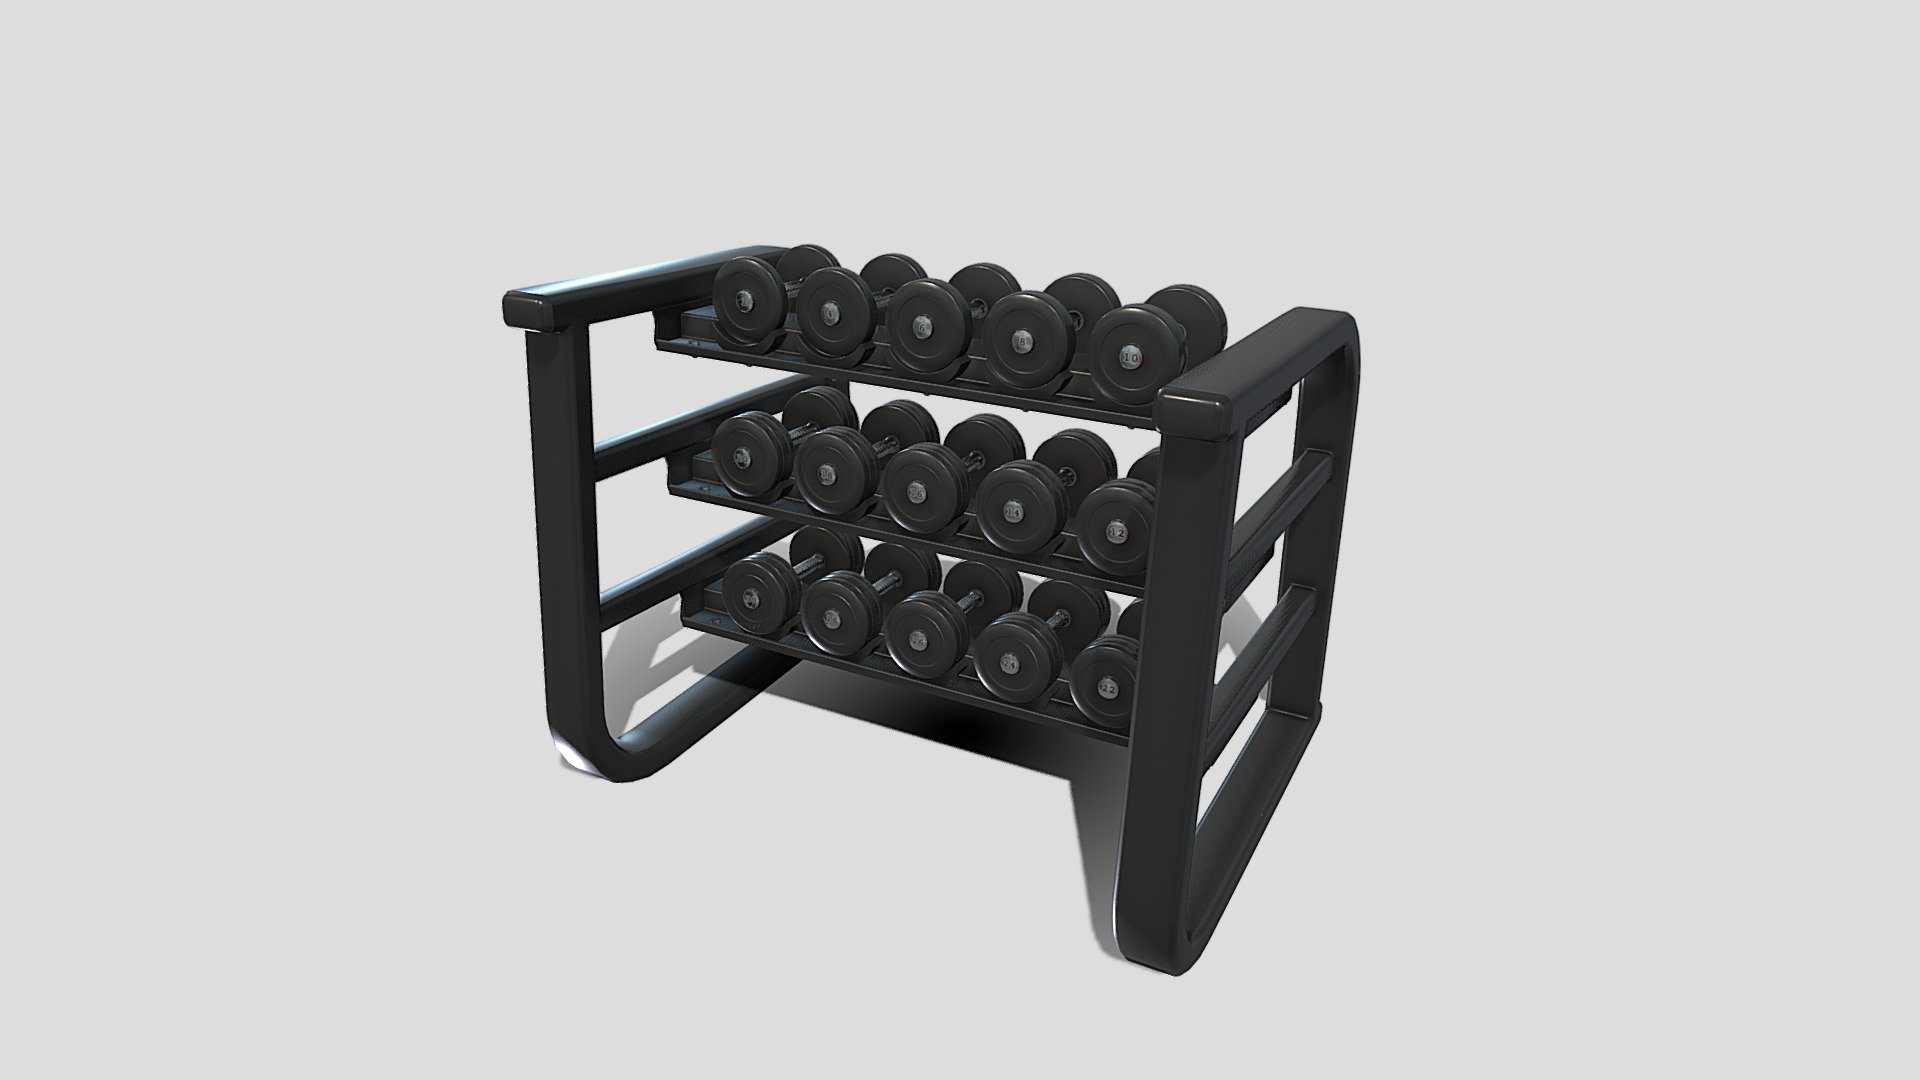 Gym machine 3d model built to real size, rendered with Cycles in Blender, as per seen on attached images. 

File formats:
-.blend, rendered with cycles, as seen in the images;
-.obj, with materials applied;
-.dae, with materials applied;
-.fbx, with materials applied;
-.stl;

Files come named appropriately and split by file format.

3D Software:
The 3D model was originally created in Blender 3.1 and rendered with Cycles.

Materials and textures:
The models have materials applied in all formats, and are ready to import and render.
Materials are image based using PBR, the model comes with five 4k png image textures.

Preview scenes:
The preview images are rendered in Blender using its built-in render engine &lsquo;Cycles'.
Note that the blend files come directly with the rendering scene included and the render command will generate the exact result as seen in previews.

General:
The models are built mostly out of quads.

For any problems please feel free to contact me.

Don't forget to rate and enjoy! - Dumbbell rack v1 - Buy Royalty Free 3D model by dragosburian 3d model